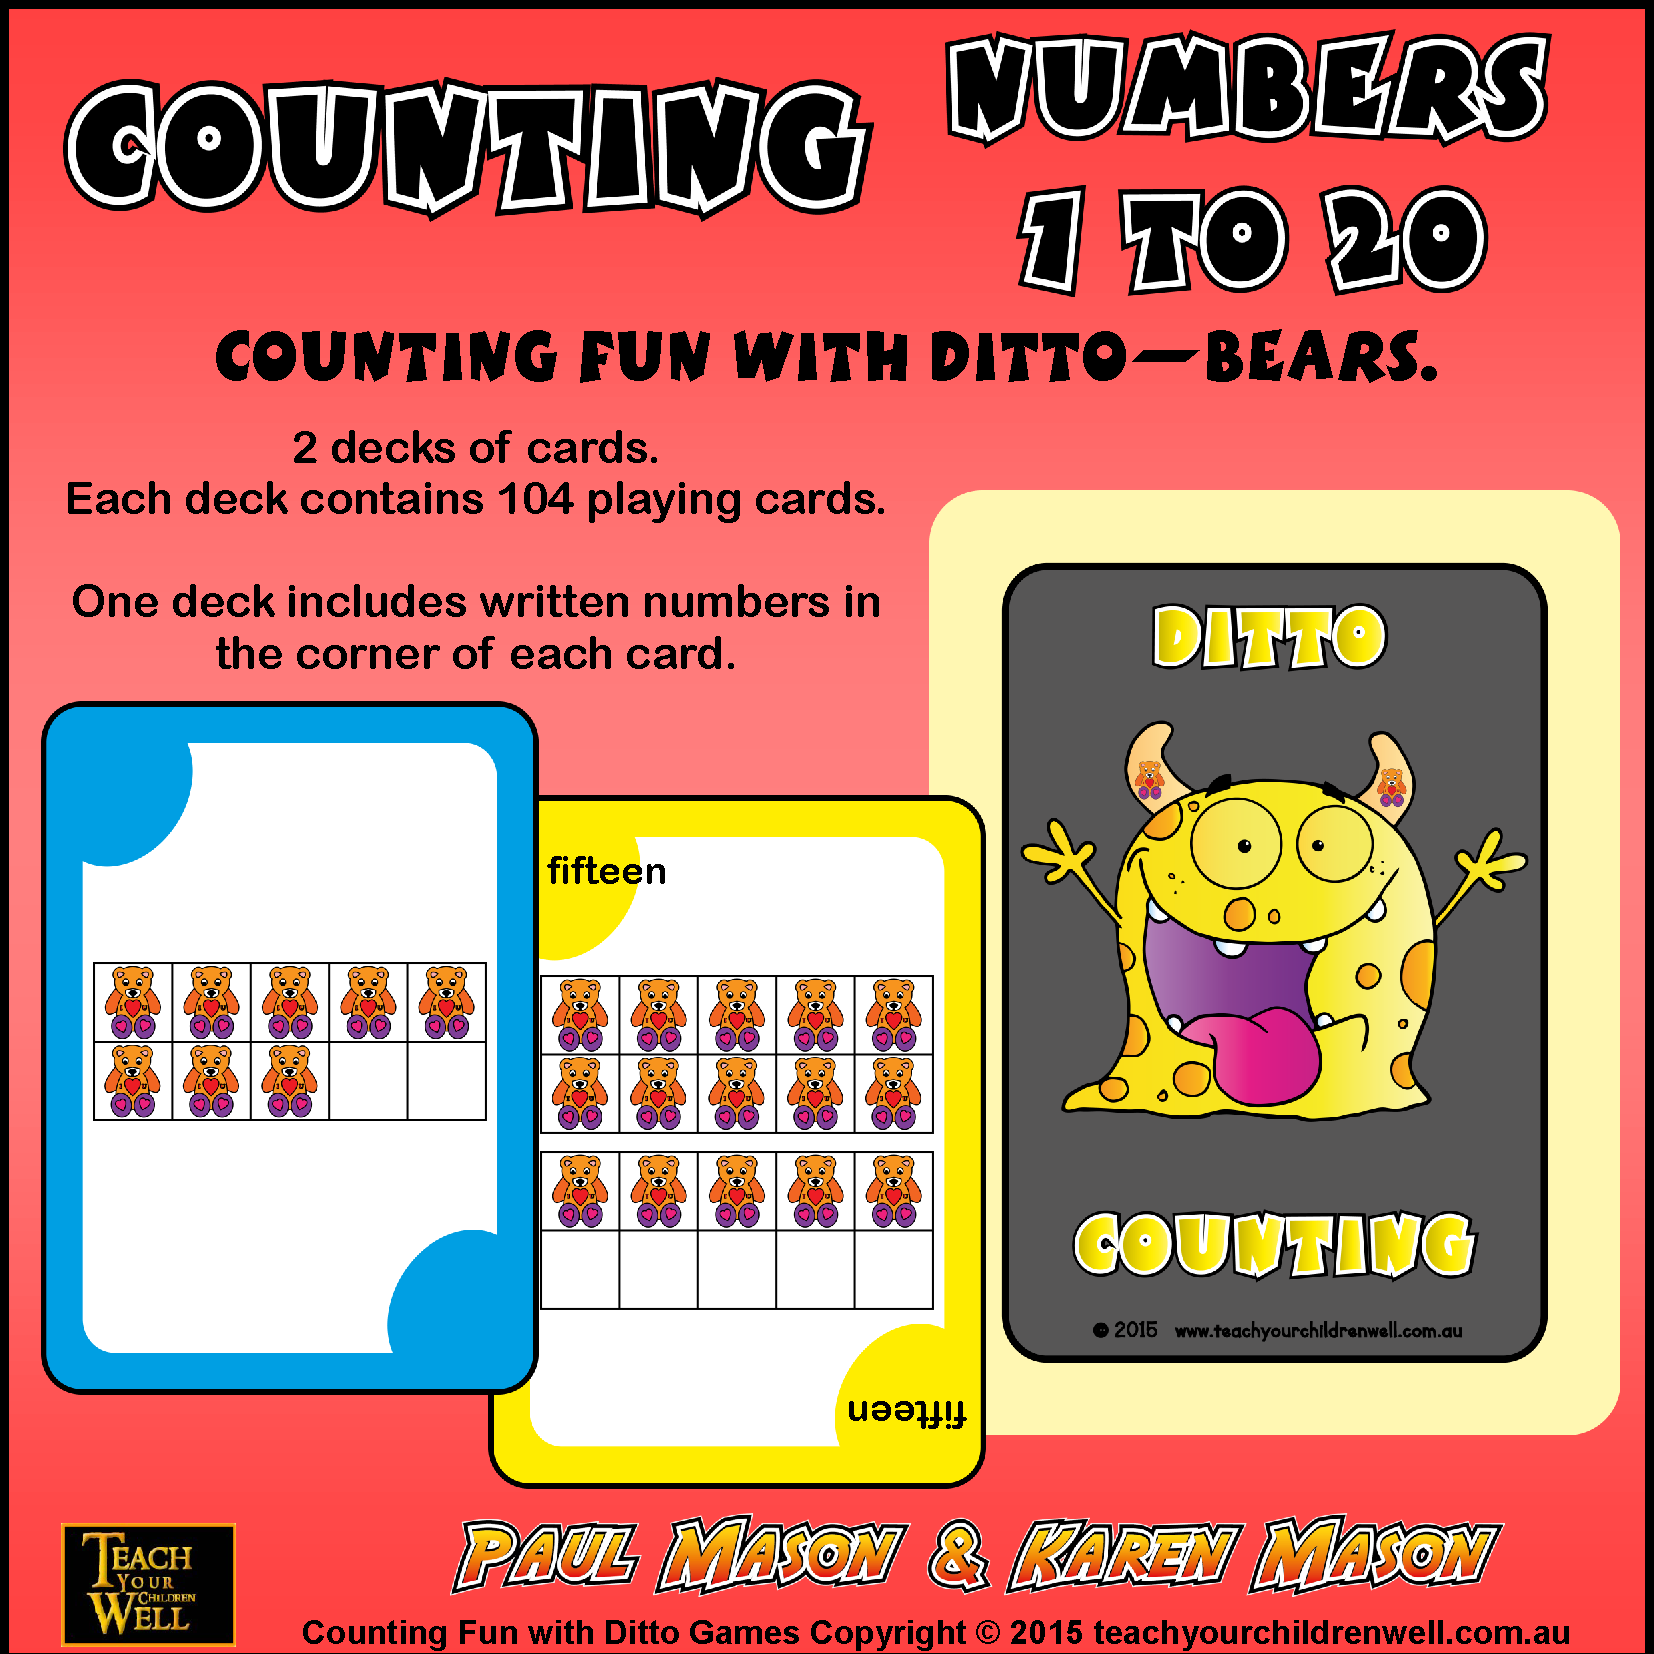 COUNTING NUMBERS 1 TO 20 WITH DITTO - BEARS